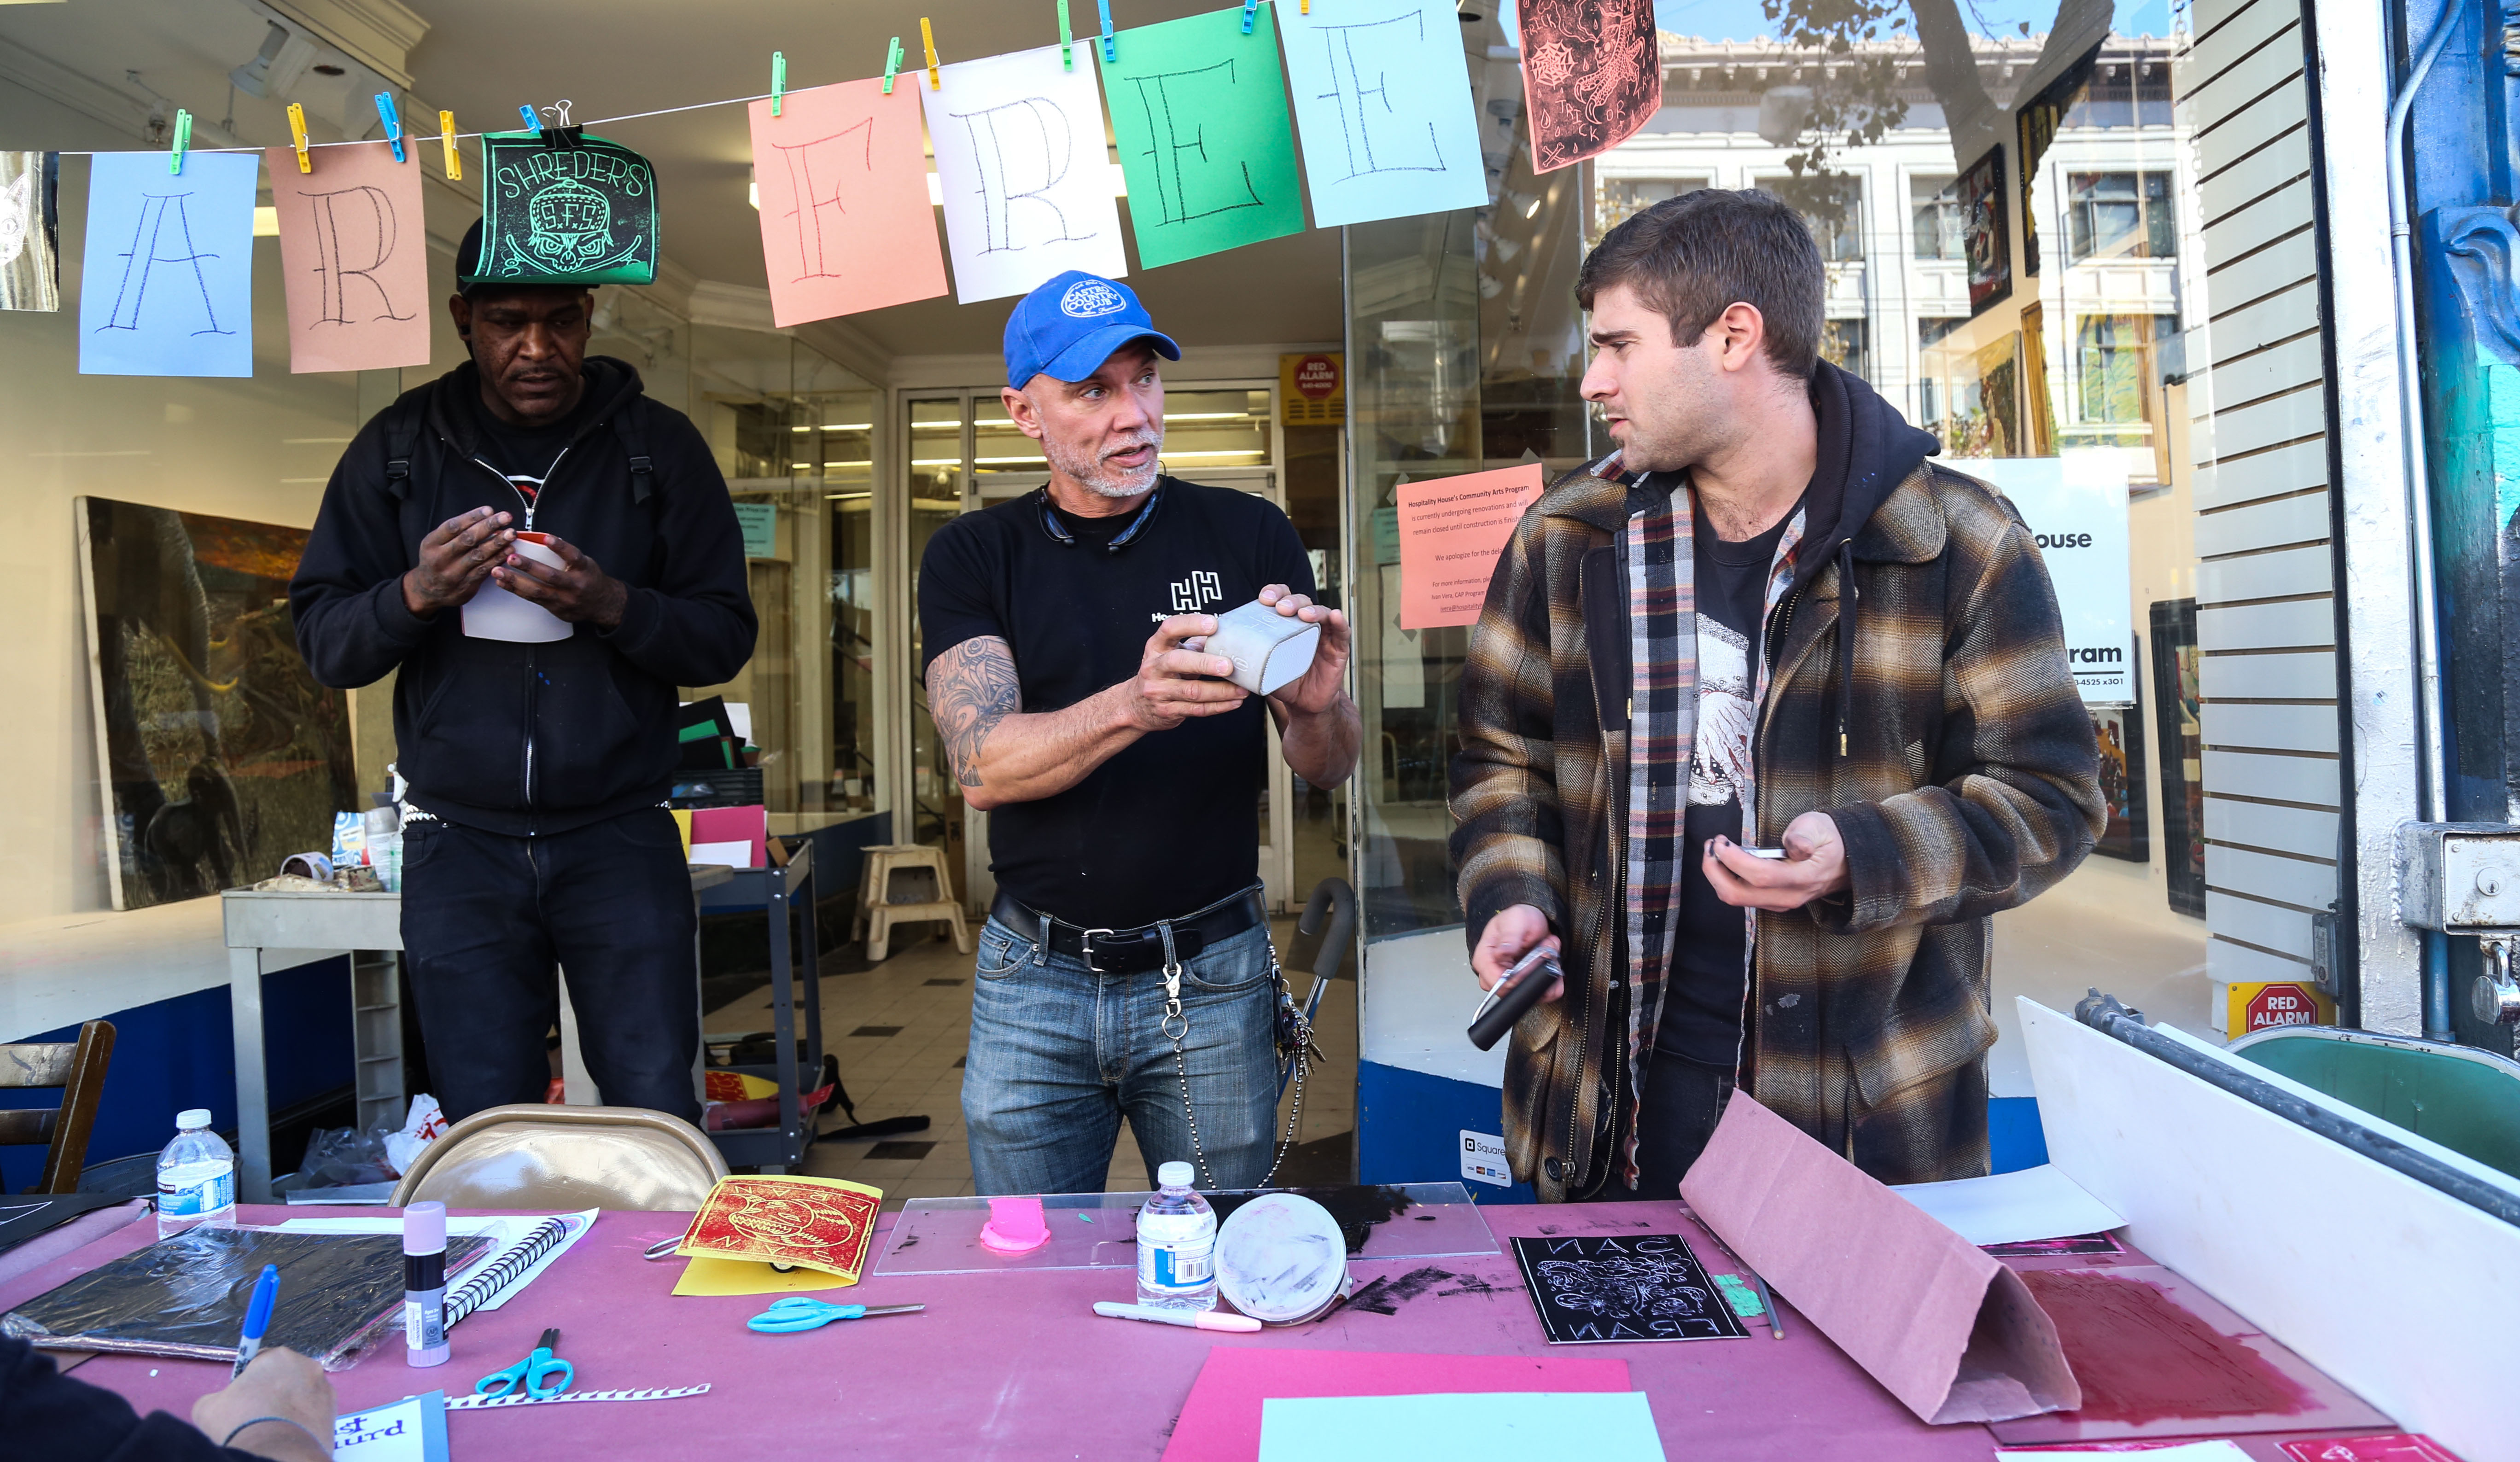 Studio Manager and City College student Ivan Vera, left, and CAP ceramics instructor Josh Reinstein, right, set up art supplies at a table outside the studio at 1009 Market St. Friday Nov. 7, 2015. (Photo by Natasha Dangond/The Guardsman)